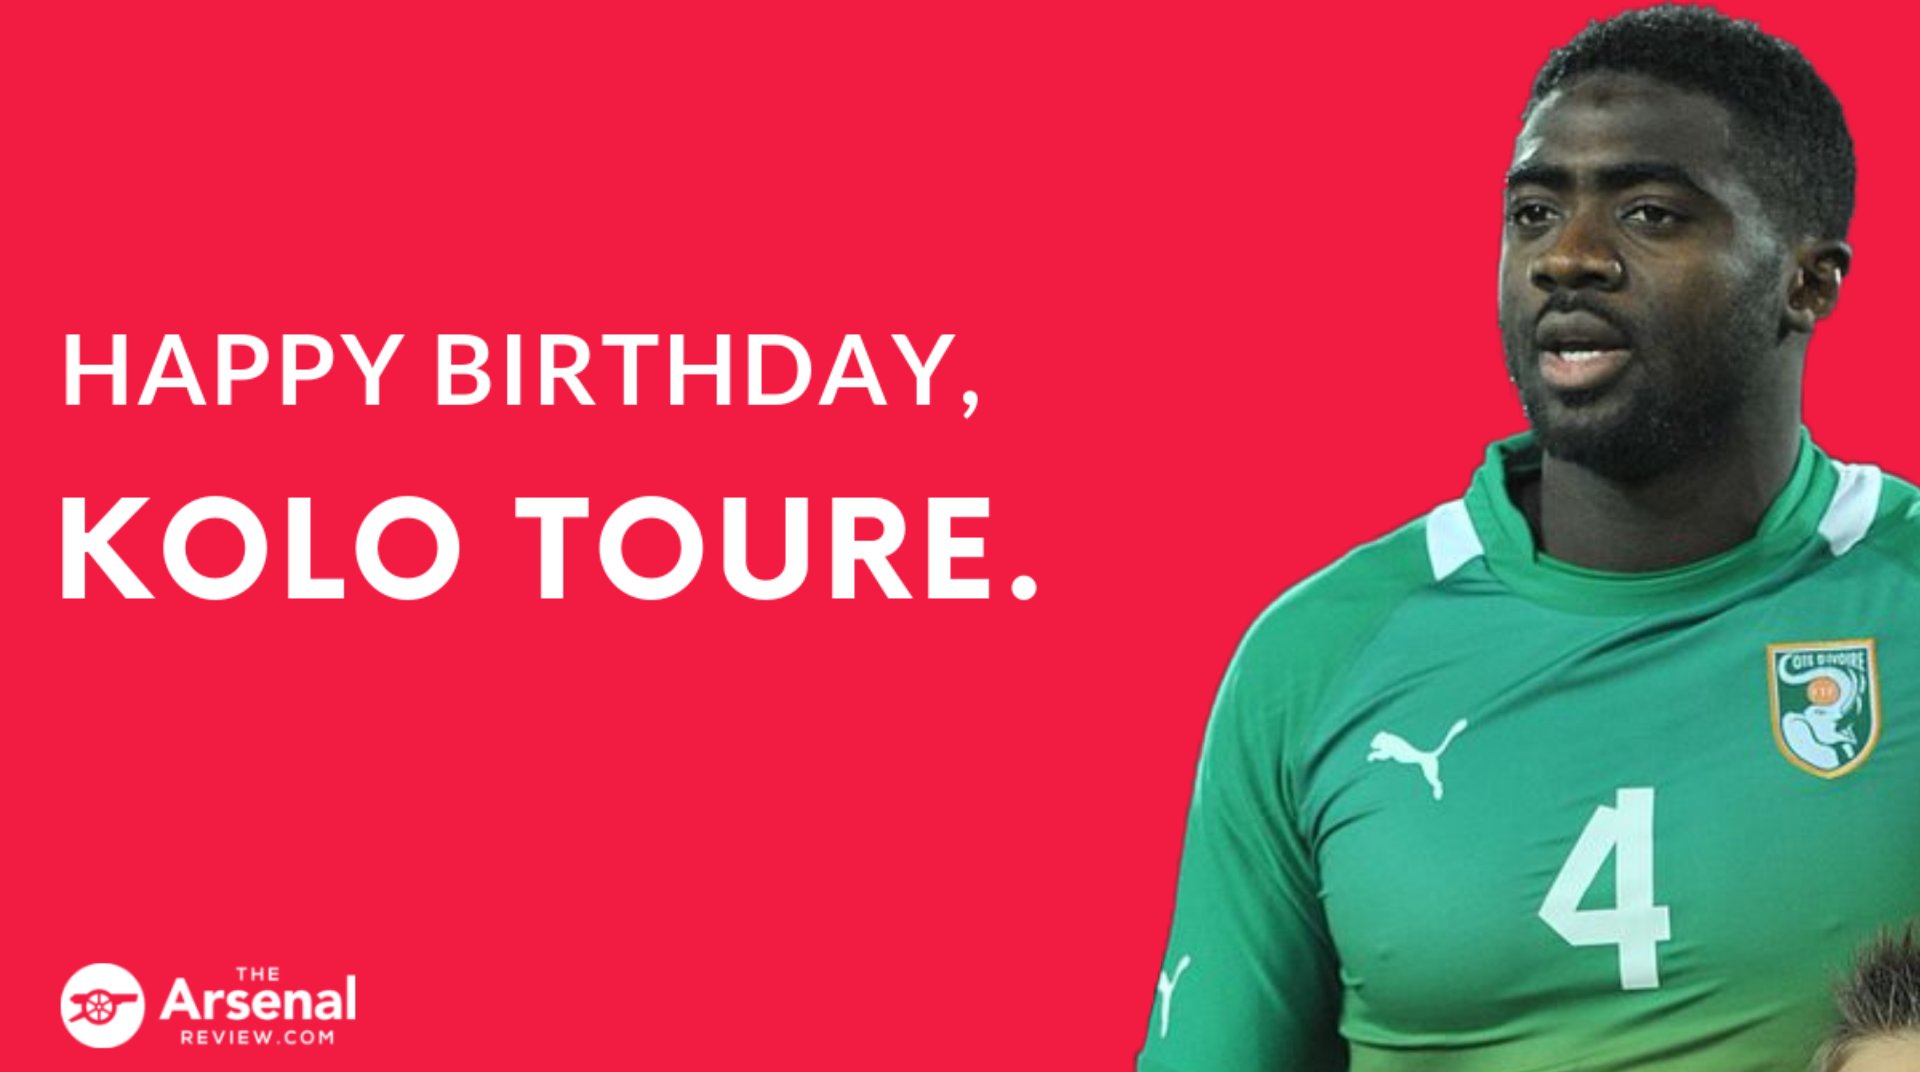 Kolo Toure spent 7 years at Arsenal and was a member of the memorable Invincible team Happy Birthday, Kolo 